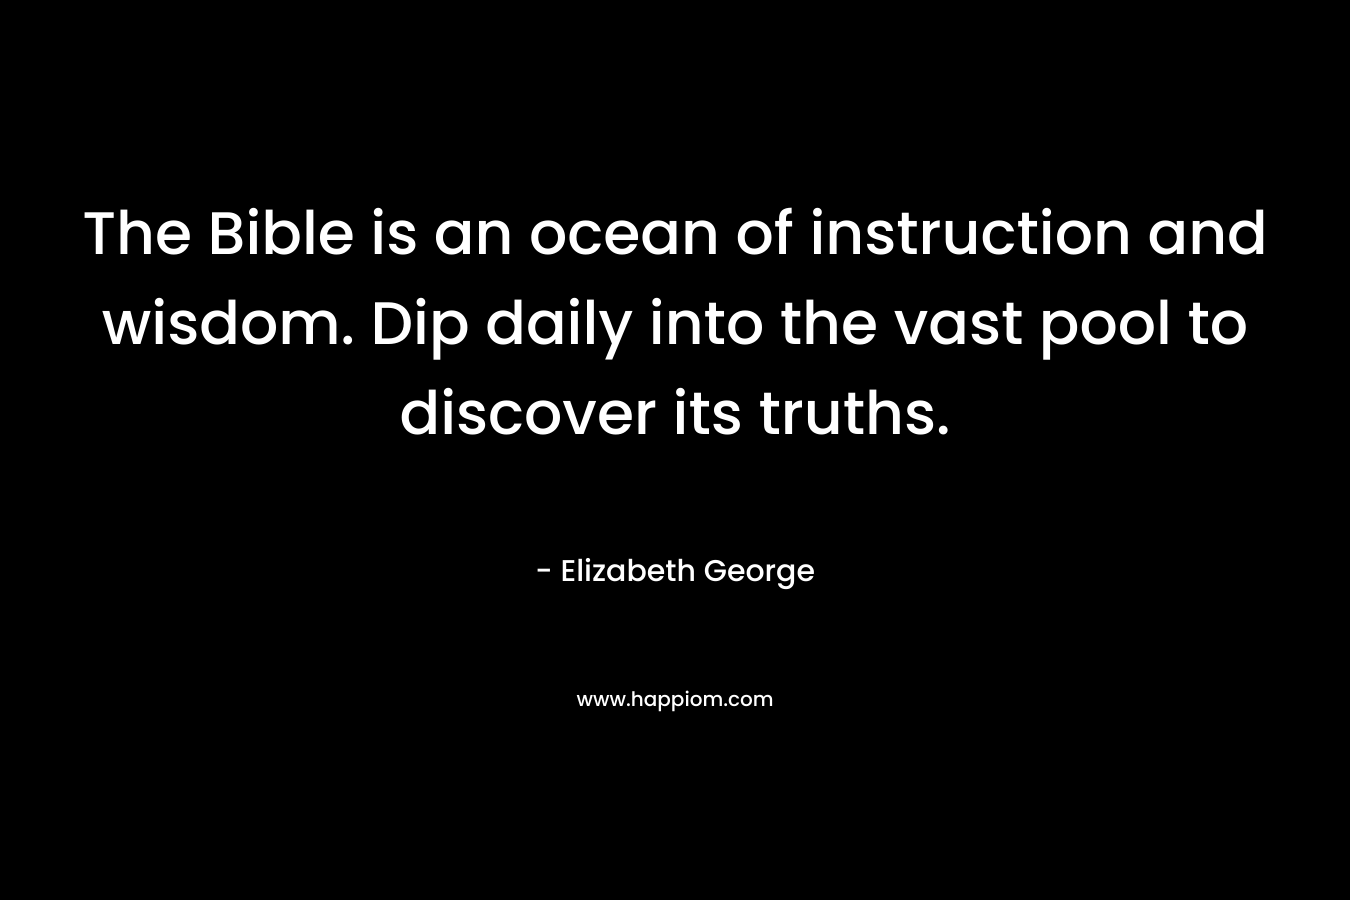 The Bible is an ocean of instruction and wisdom. Dip daily into the vast pool to discover its truths.